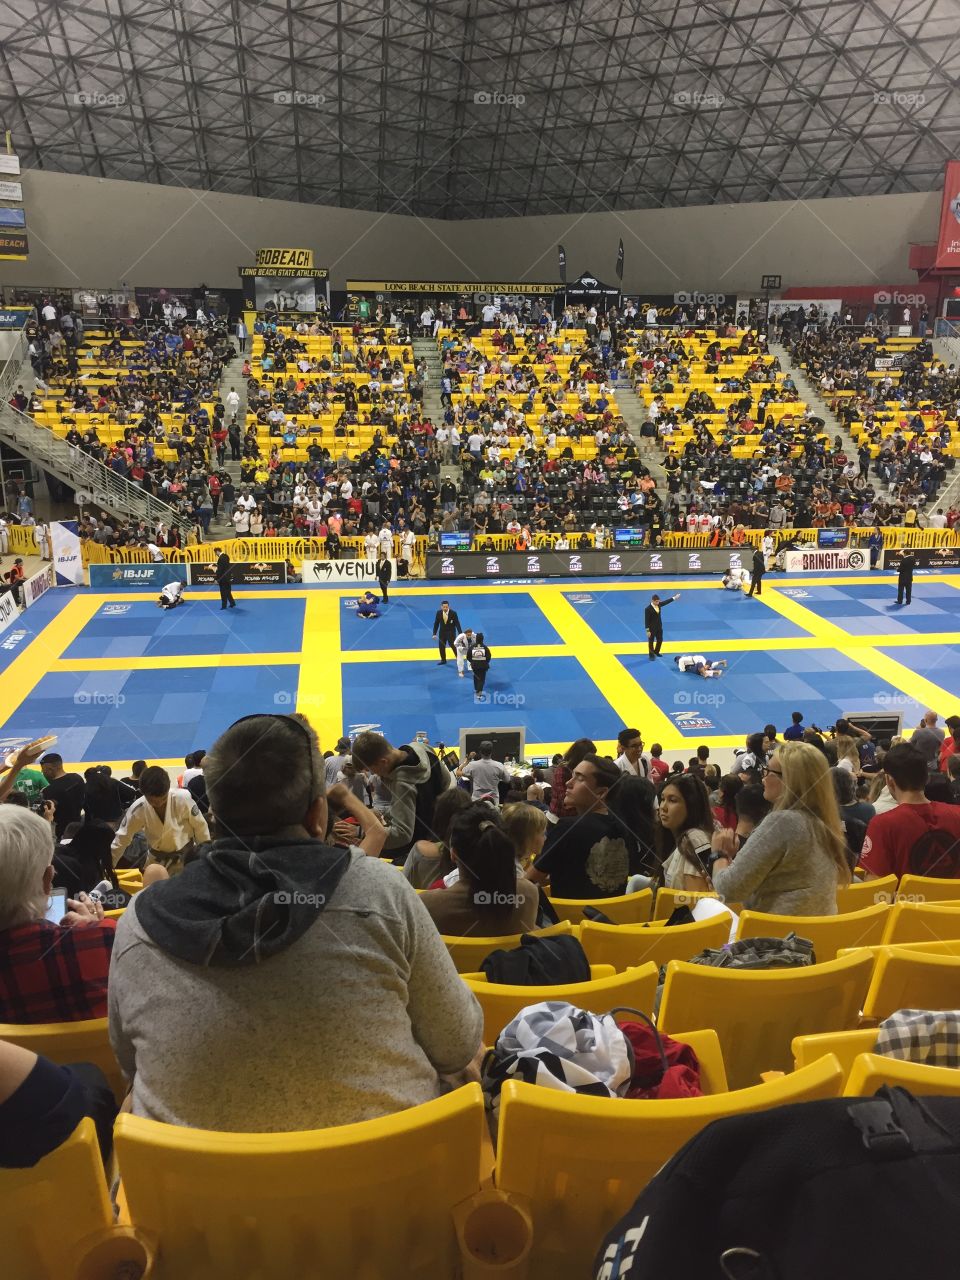 Sparring mats used during the Kids Pan-Am jujitsu tournament inside The Walter Pyramid in Long Beach, CA.